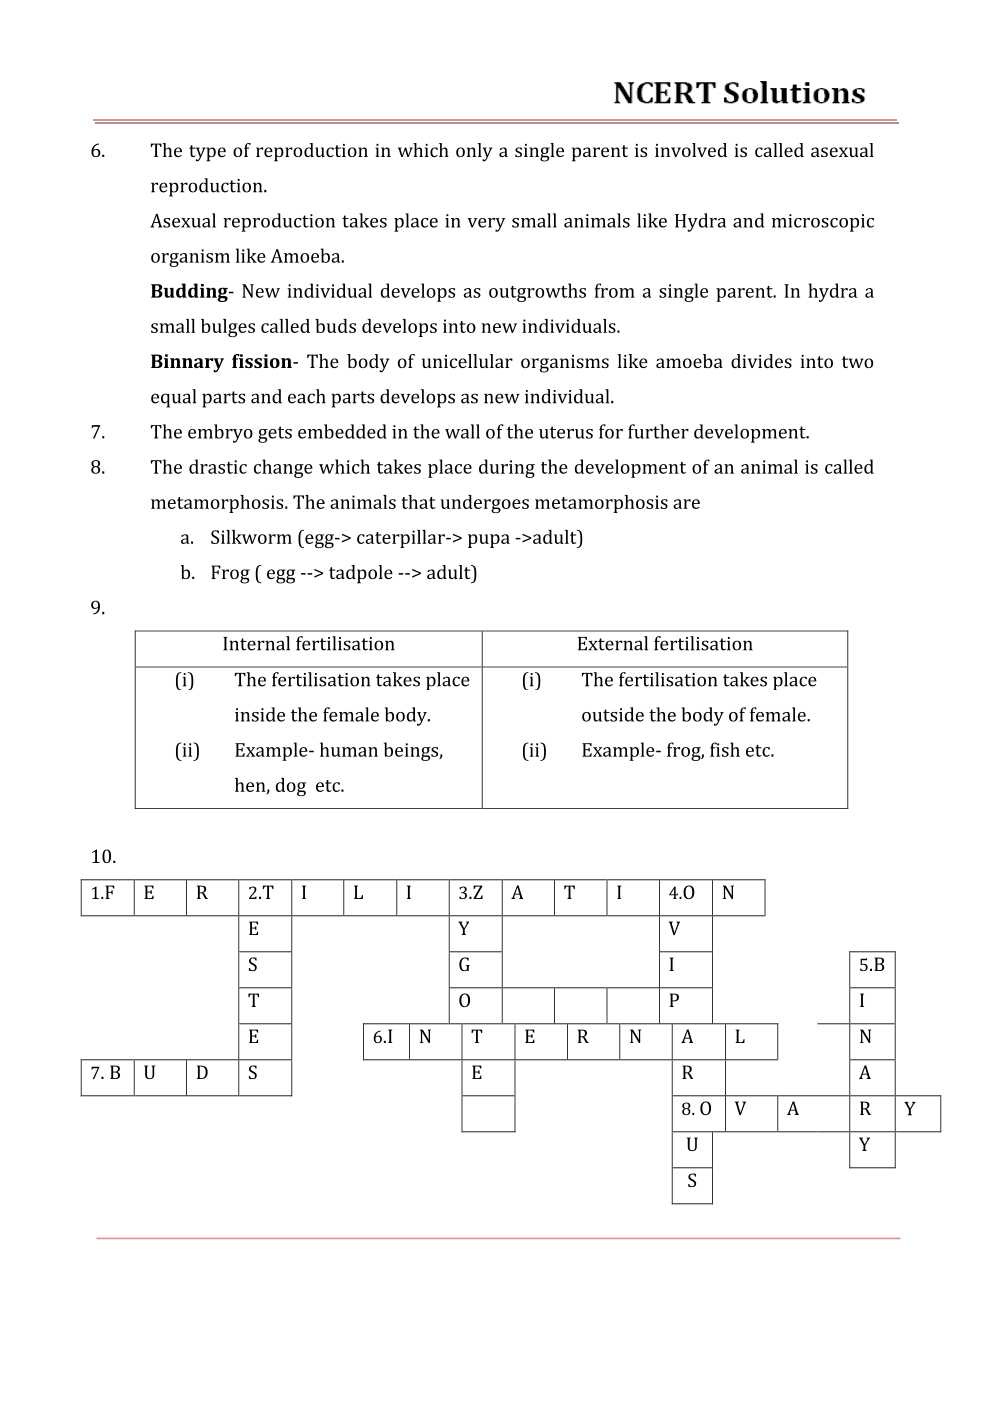 NCERT Solutions For Class 8 Science Chapter 9 